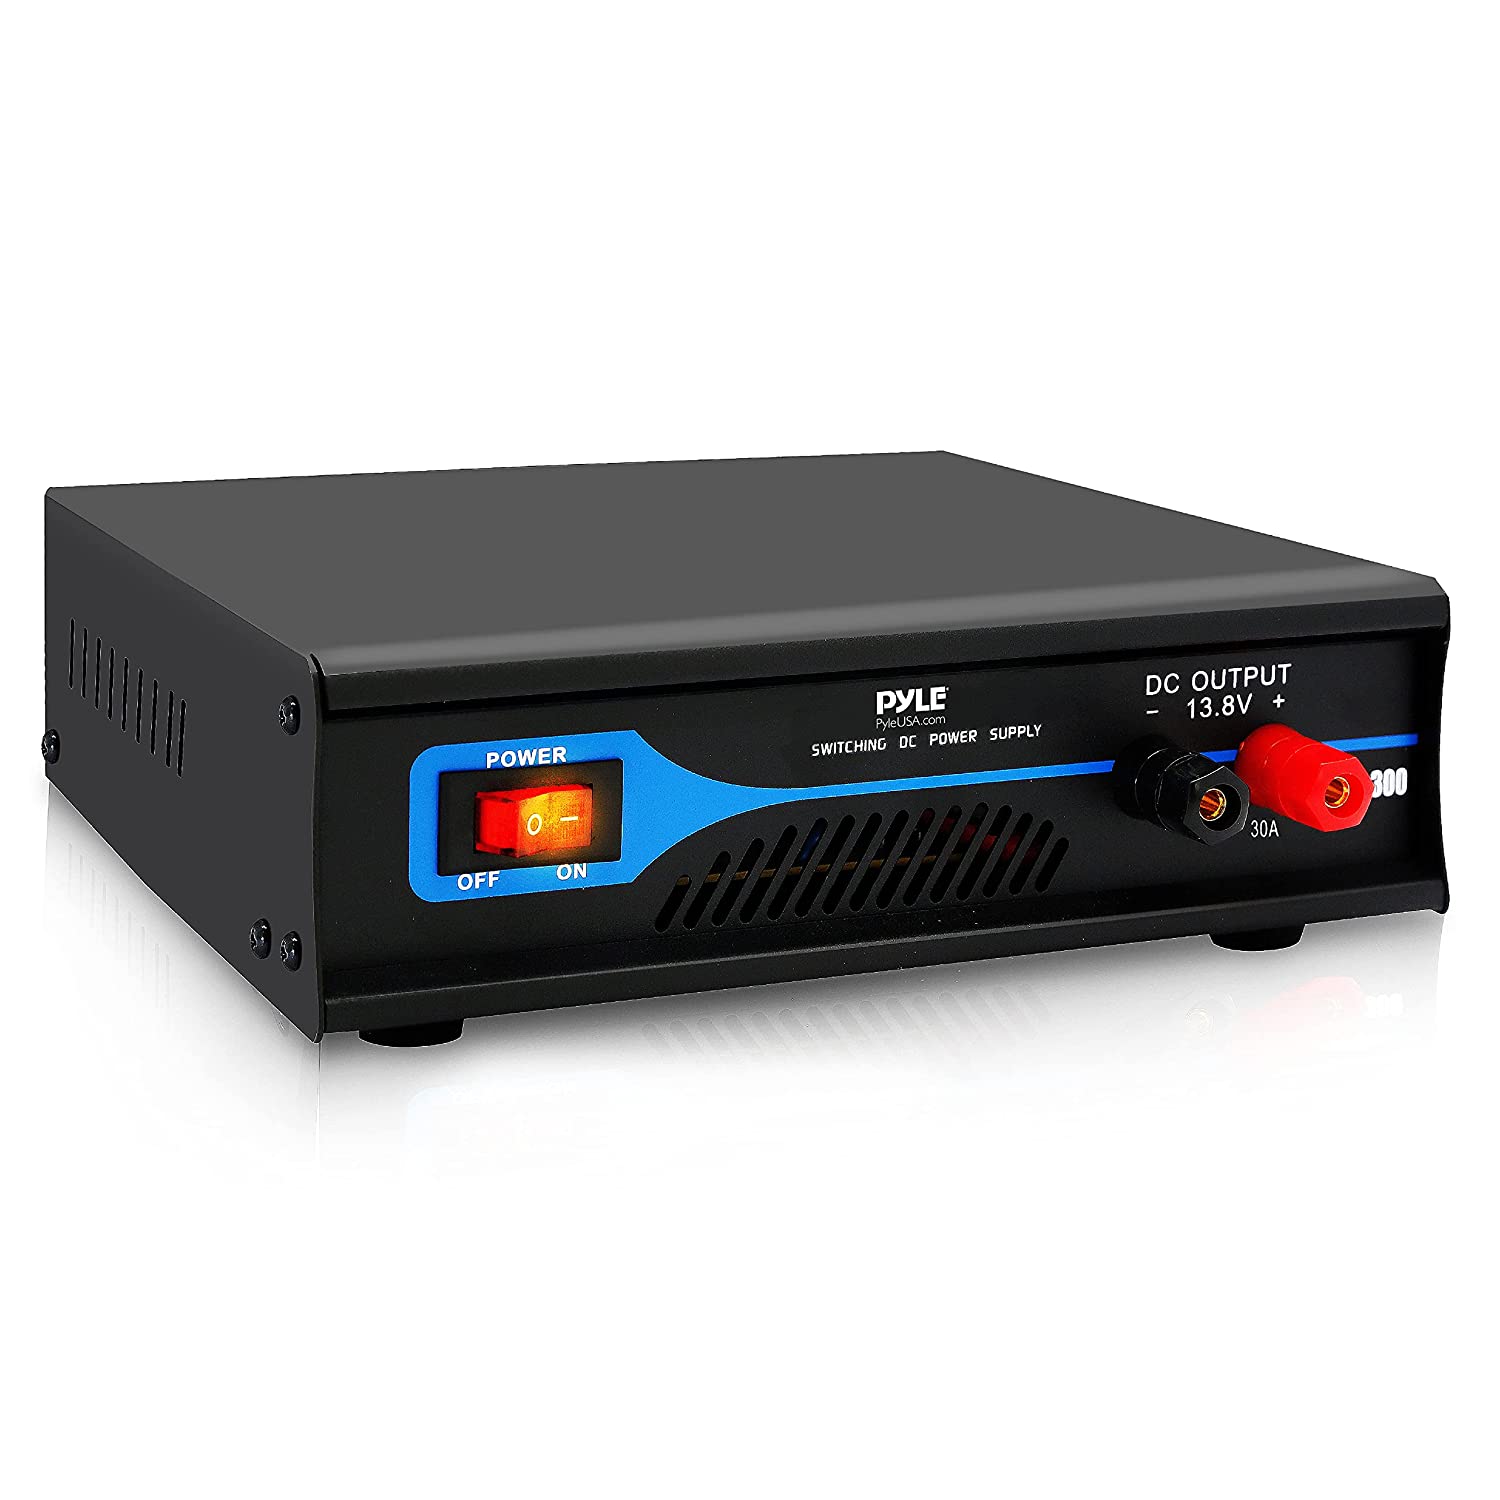 Pyle 30-Amp Heavy-Duty Switching Power Supply with Cooling Fan - image 1 of 4